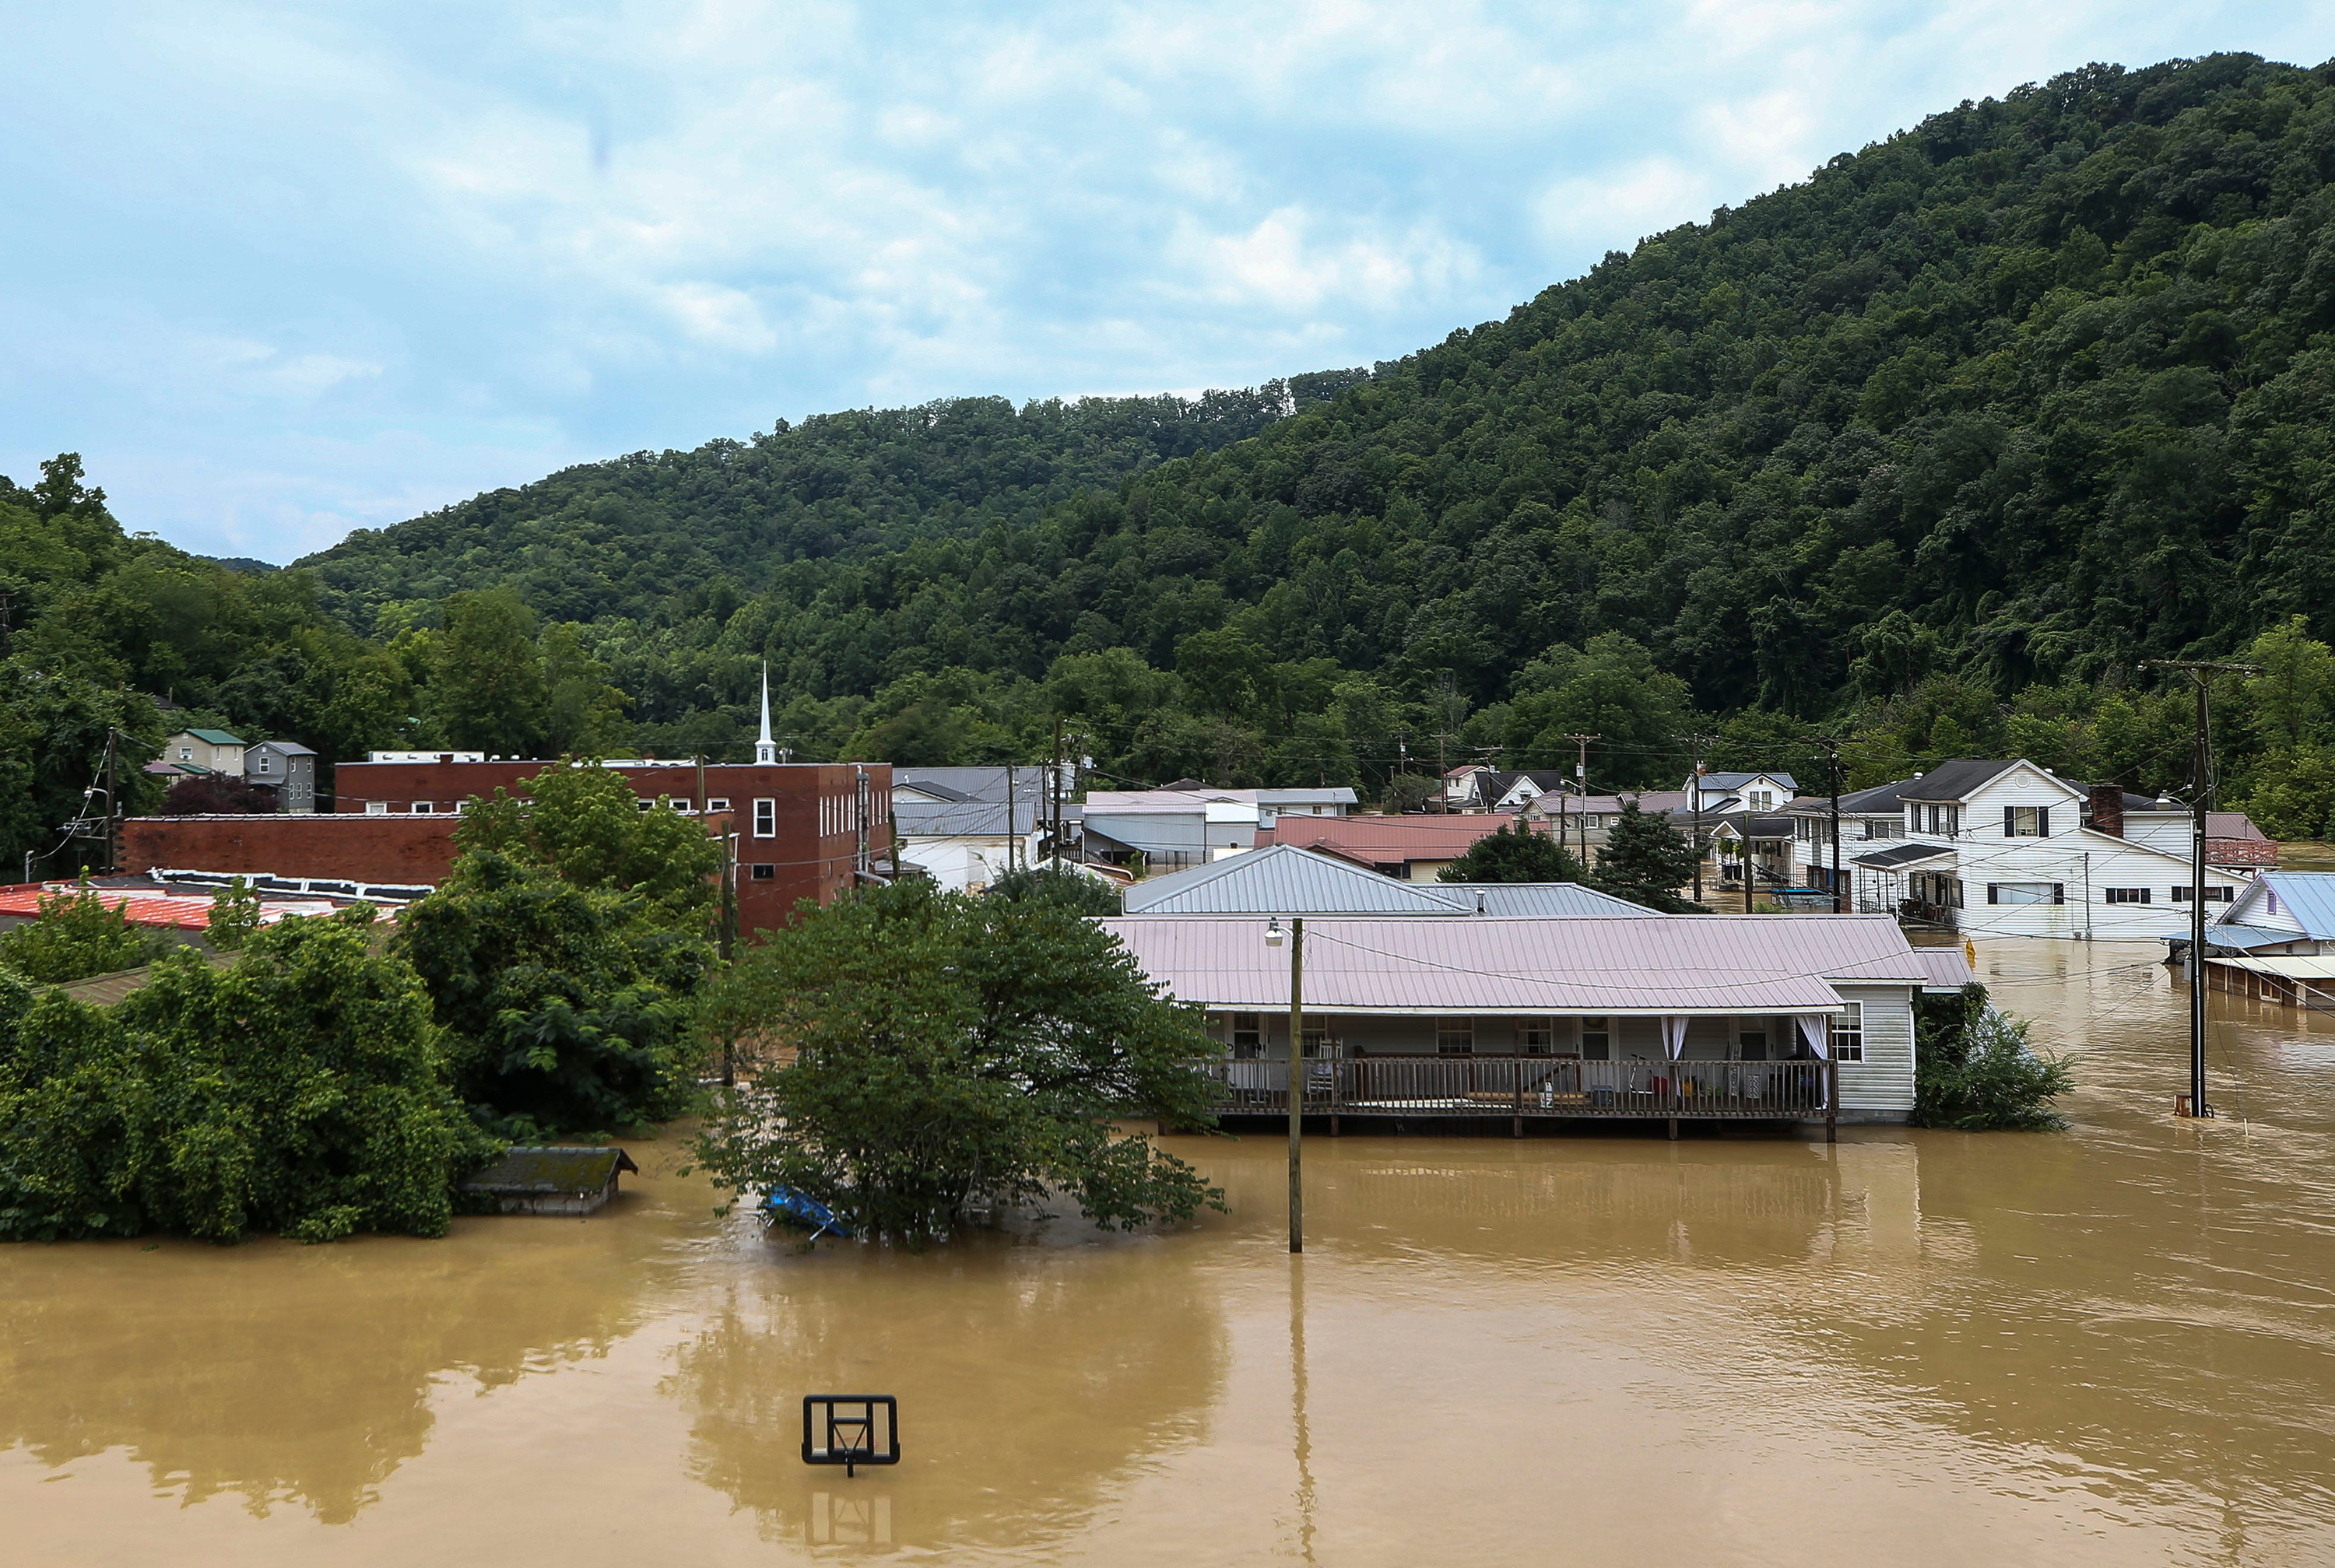 16 killed in Kentucky flooding, death toll expected to 'get a lot high E5f70853-6ffd-4b06-98c2-274412233da9